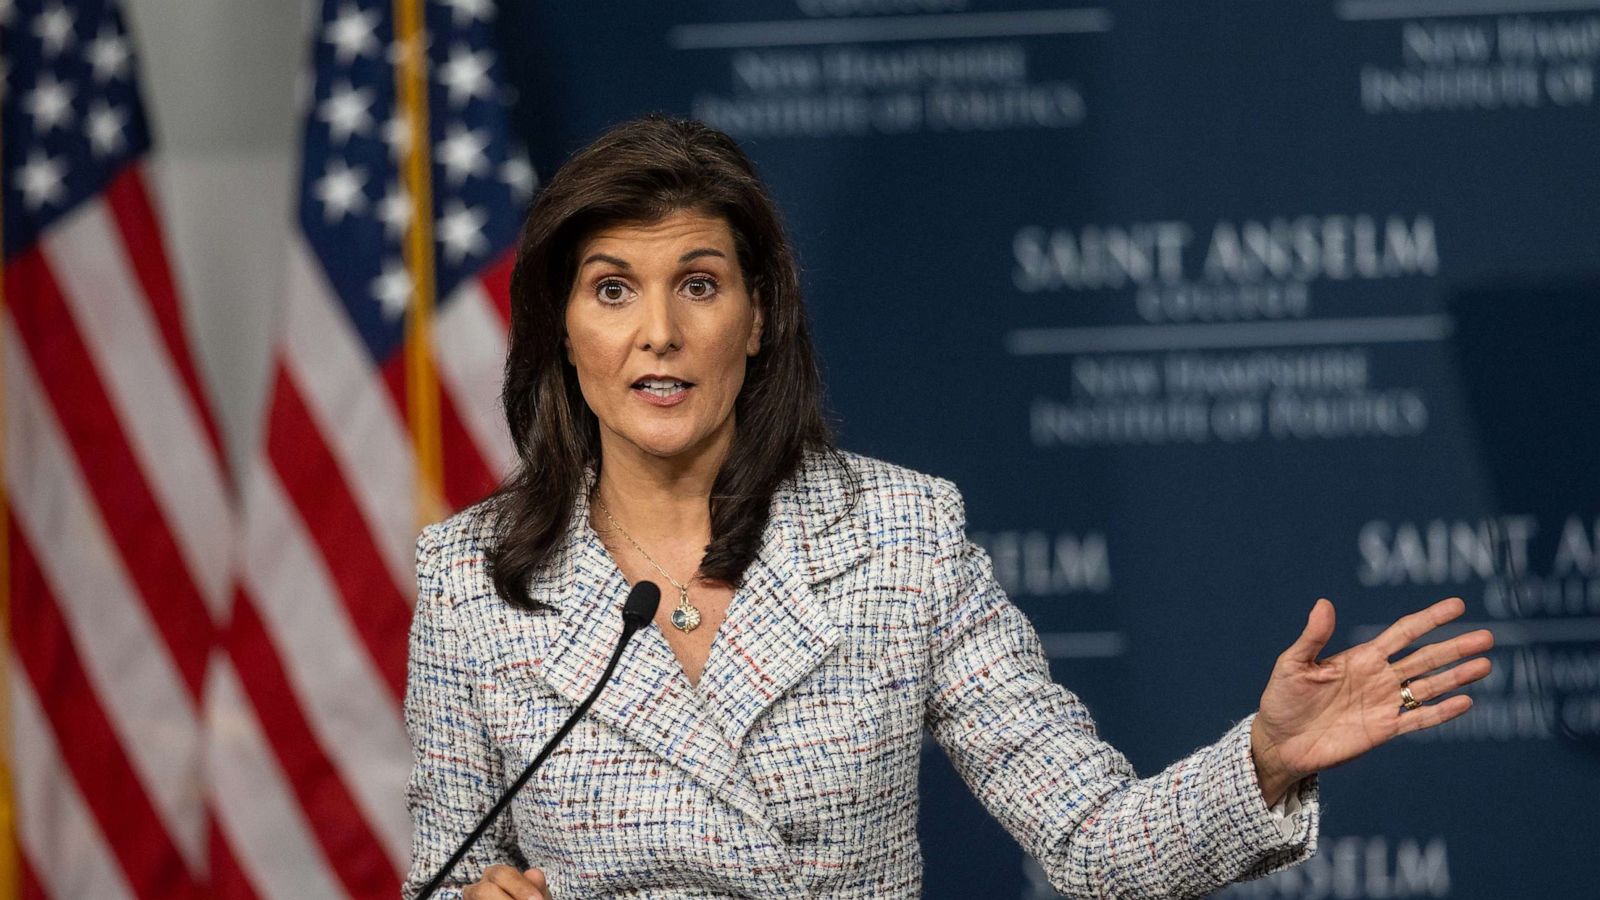 Nikki Haley Faces Critical New Hampshire Primary Against Trump’s Dominance